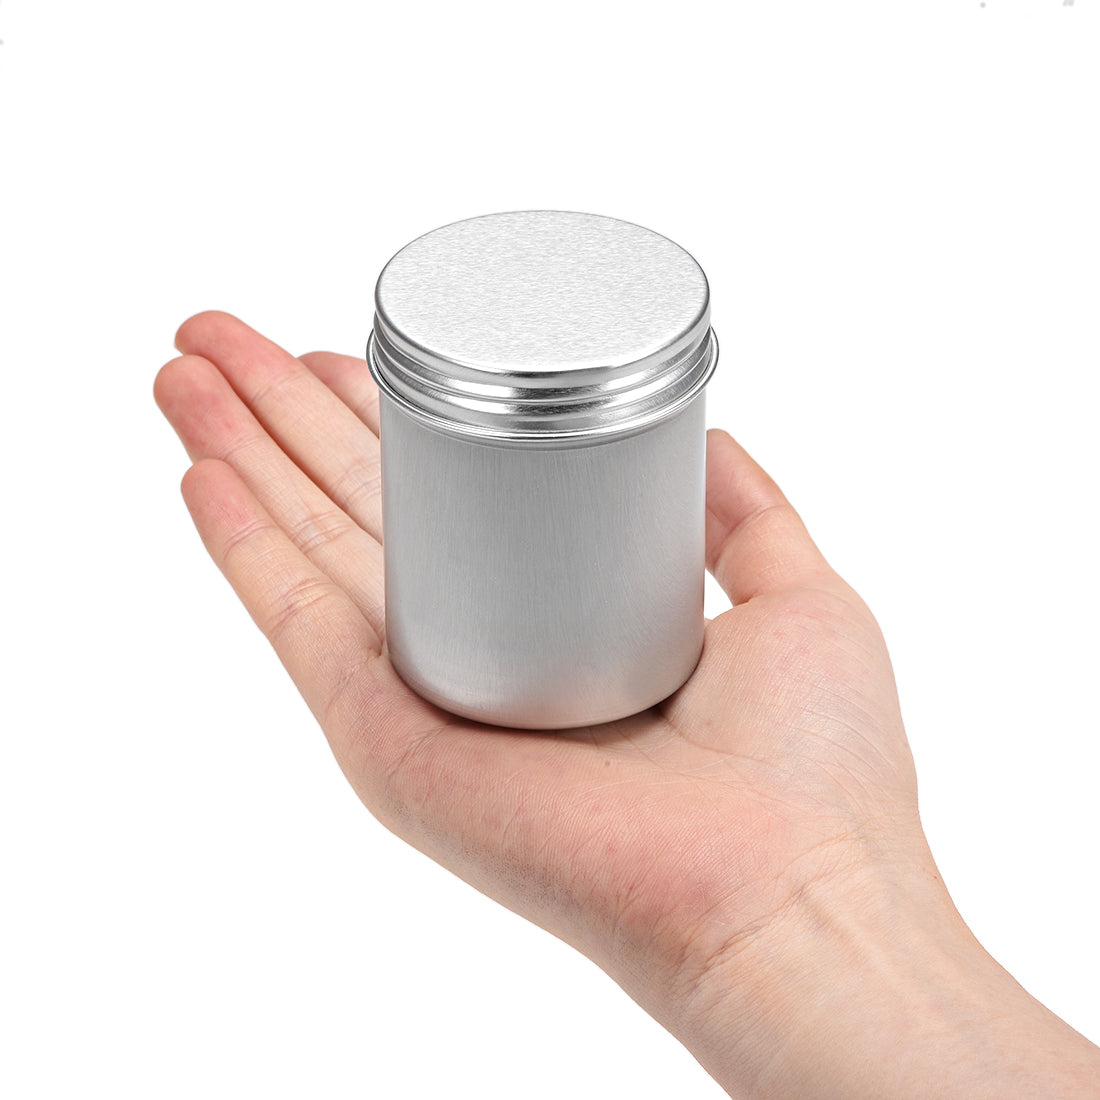 uxcell Uxcell 4.4oz Round Aluminum Cans Tin Can Screw Top Metal Lid Containers 130ml, 6pcs